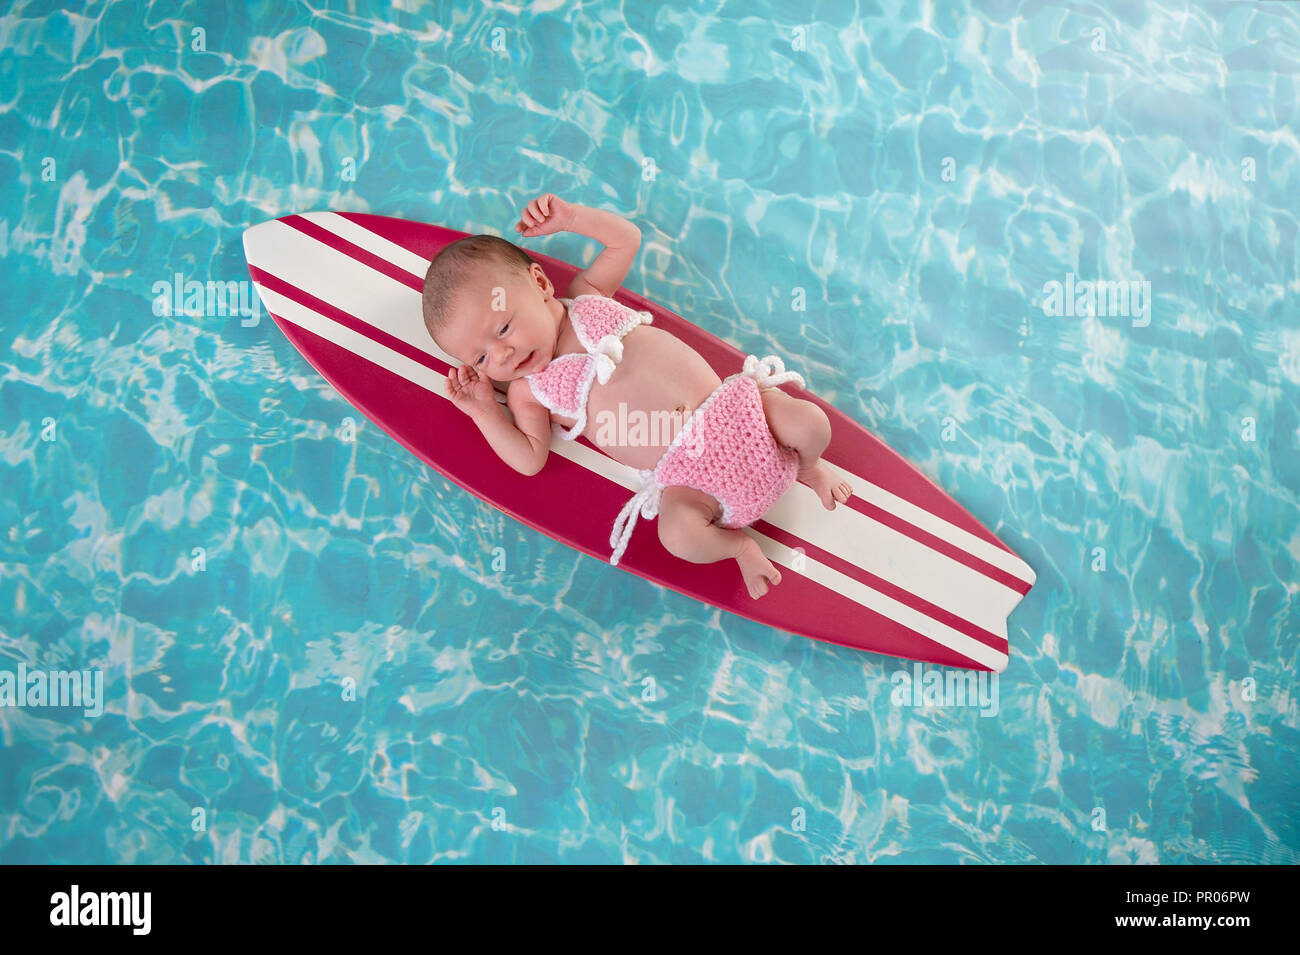 Two week old newborn baby girl lying on a tiny, pink and white surfboard. She is wearing a pink, crocheted bikini. Stock Photo